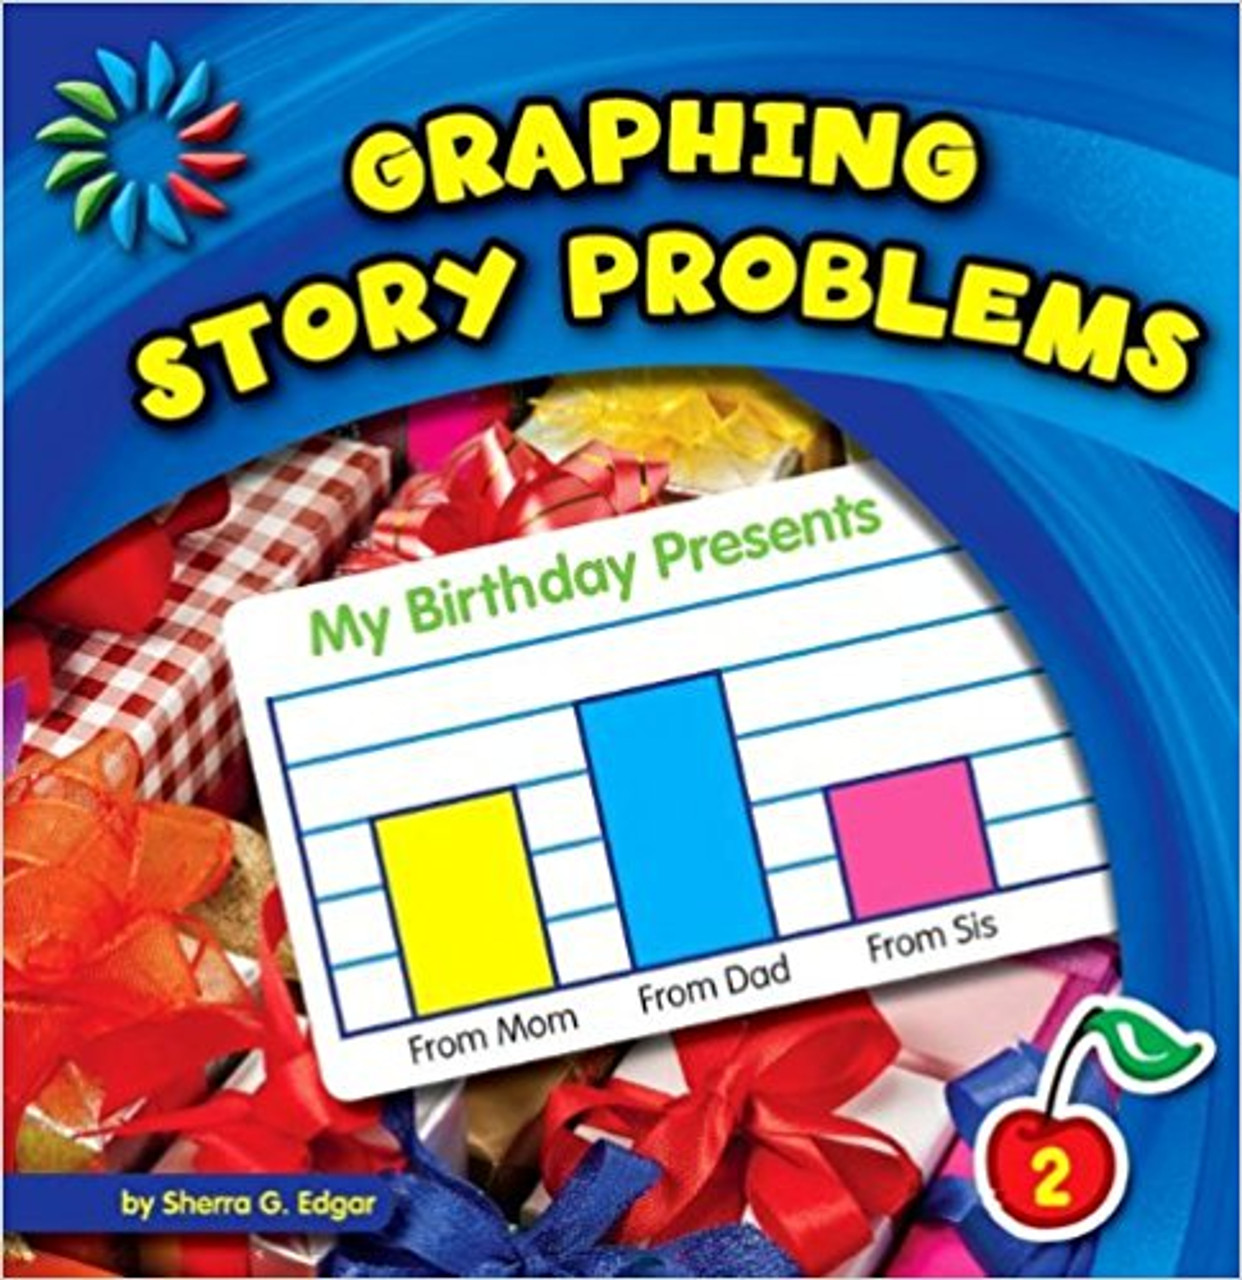 Graphing Story Problems by Sherra G. Edgar